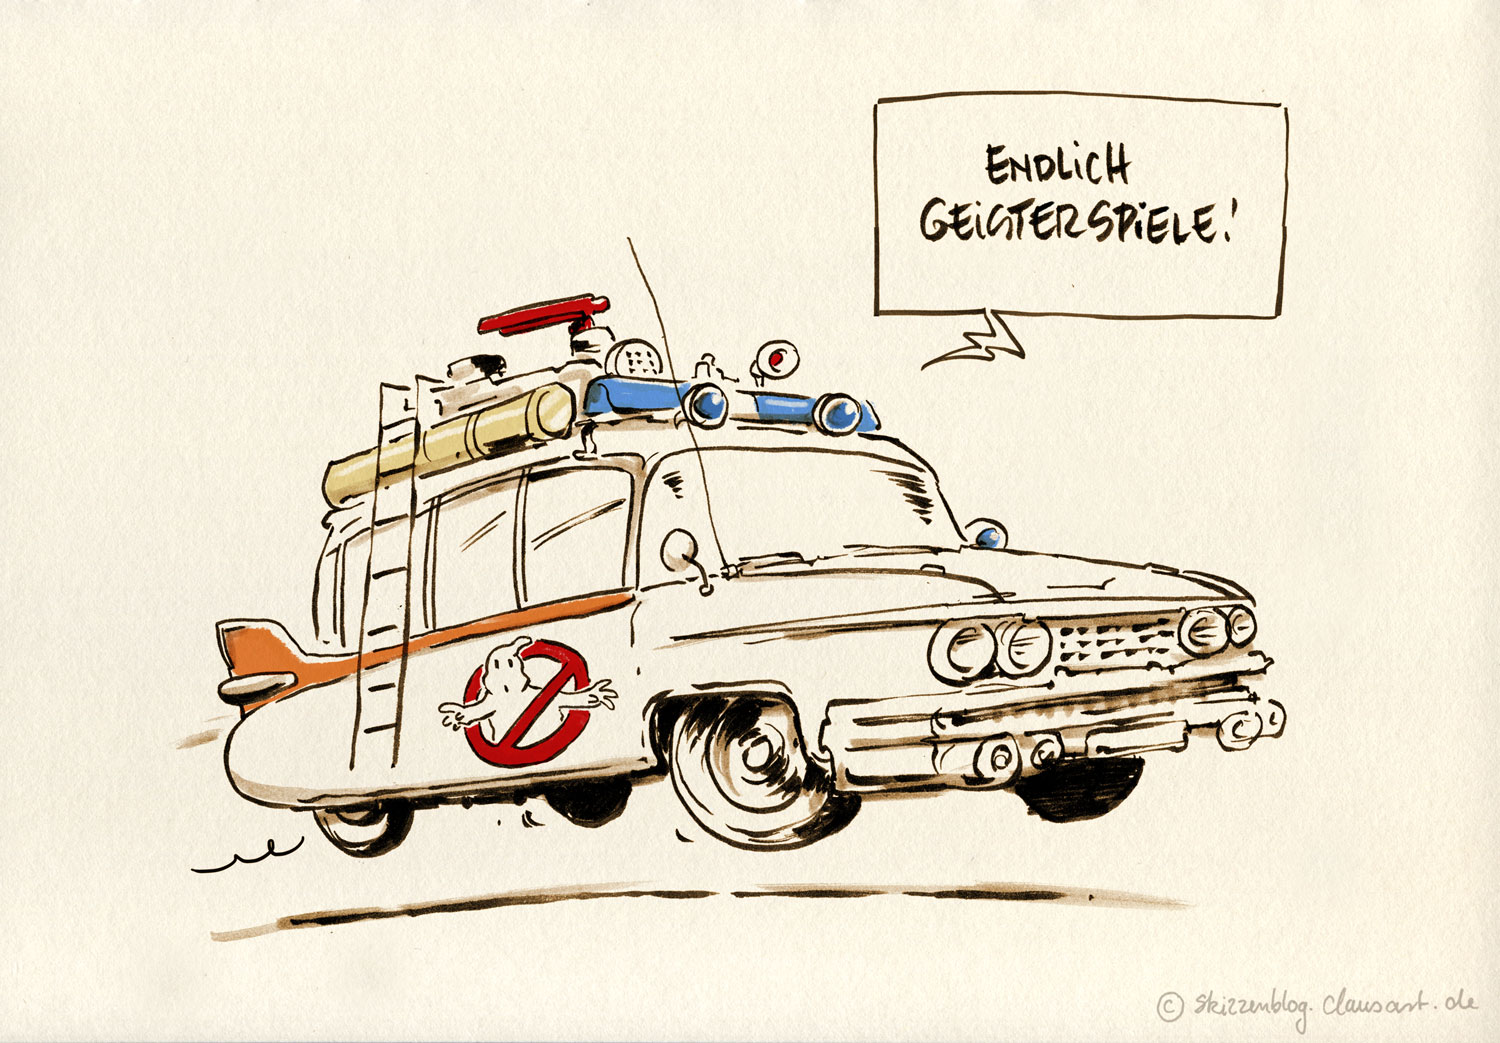 GHOSTBUSTERS!